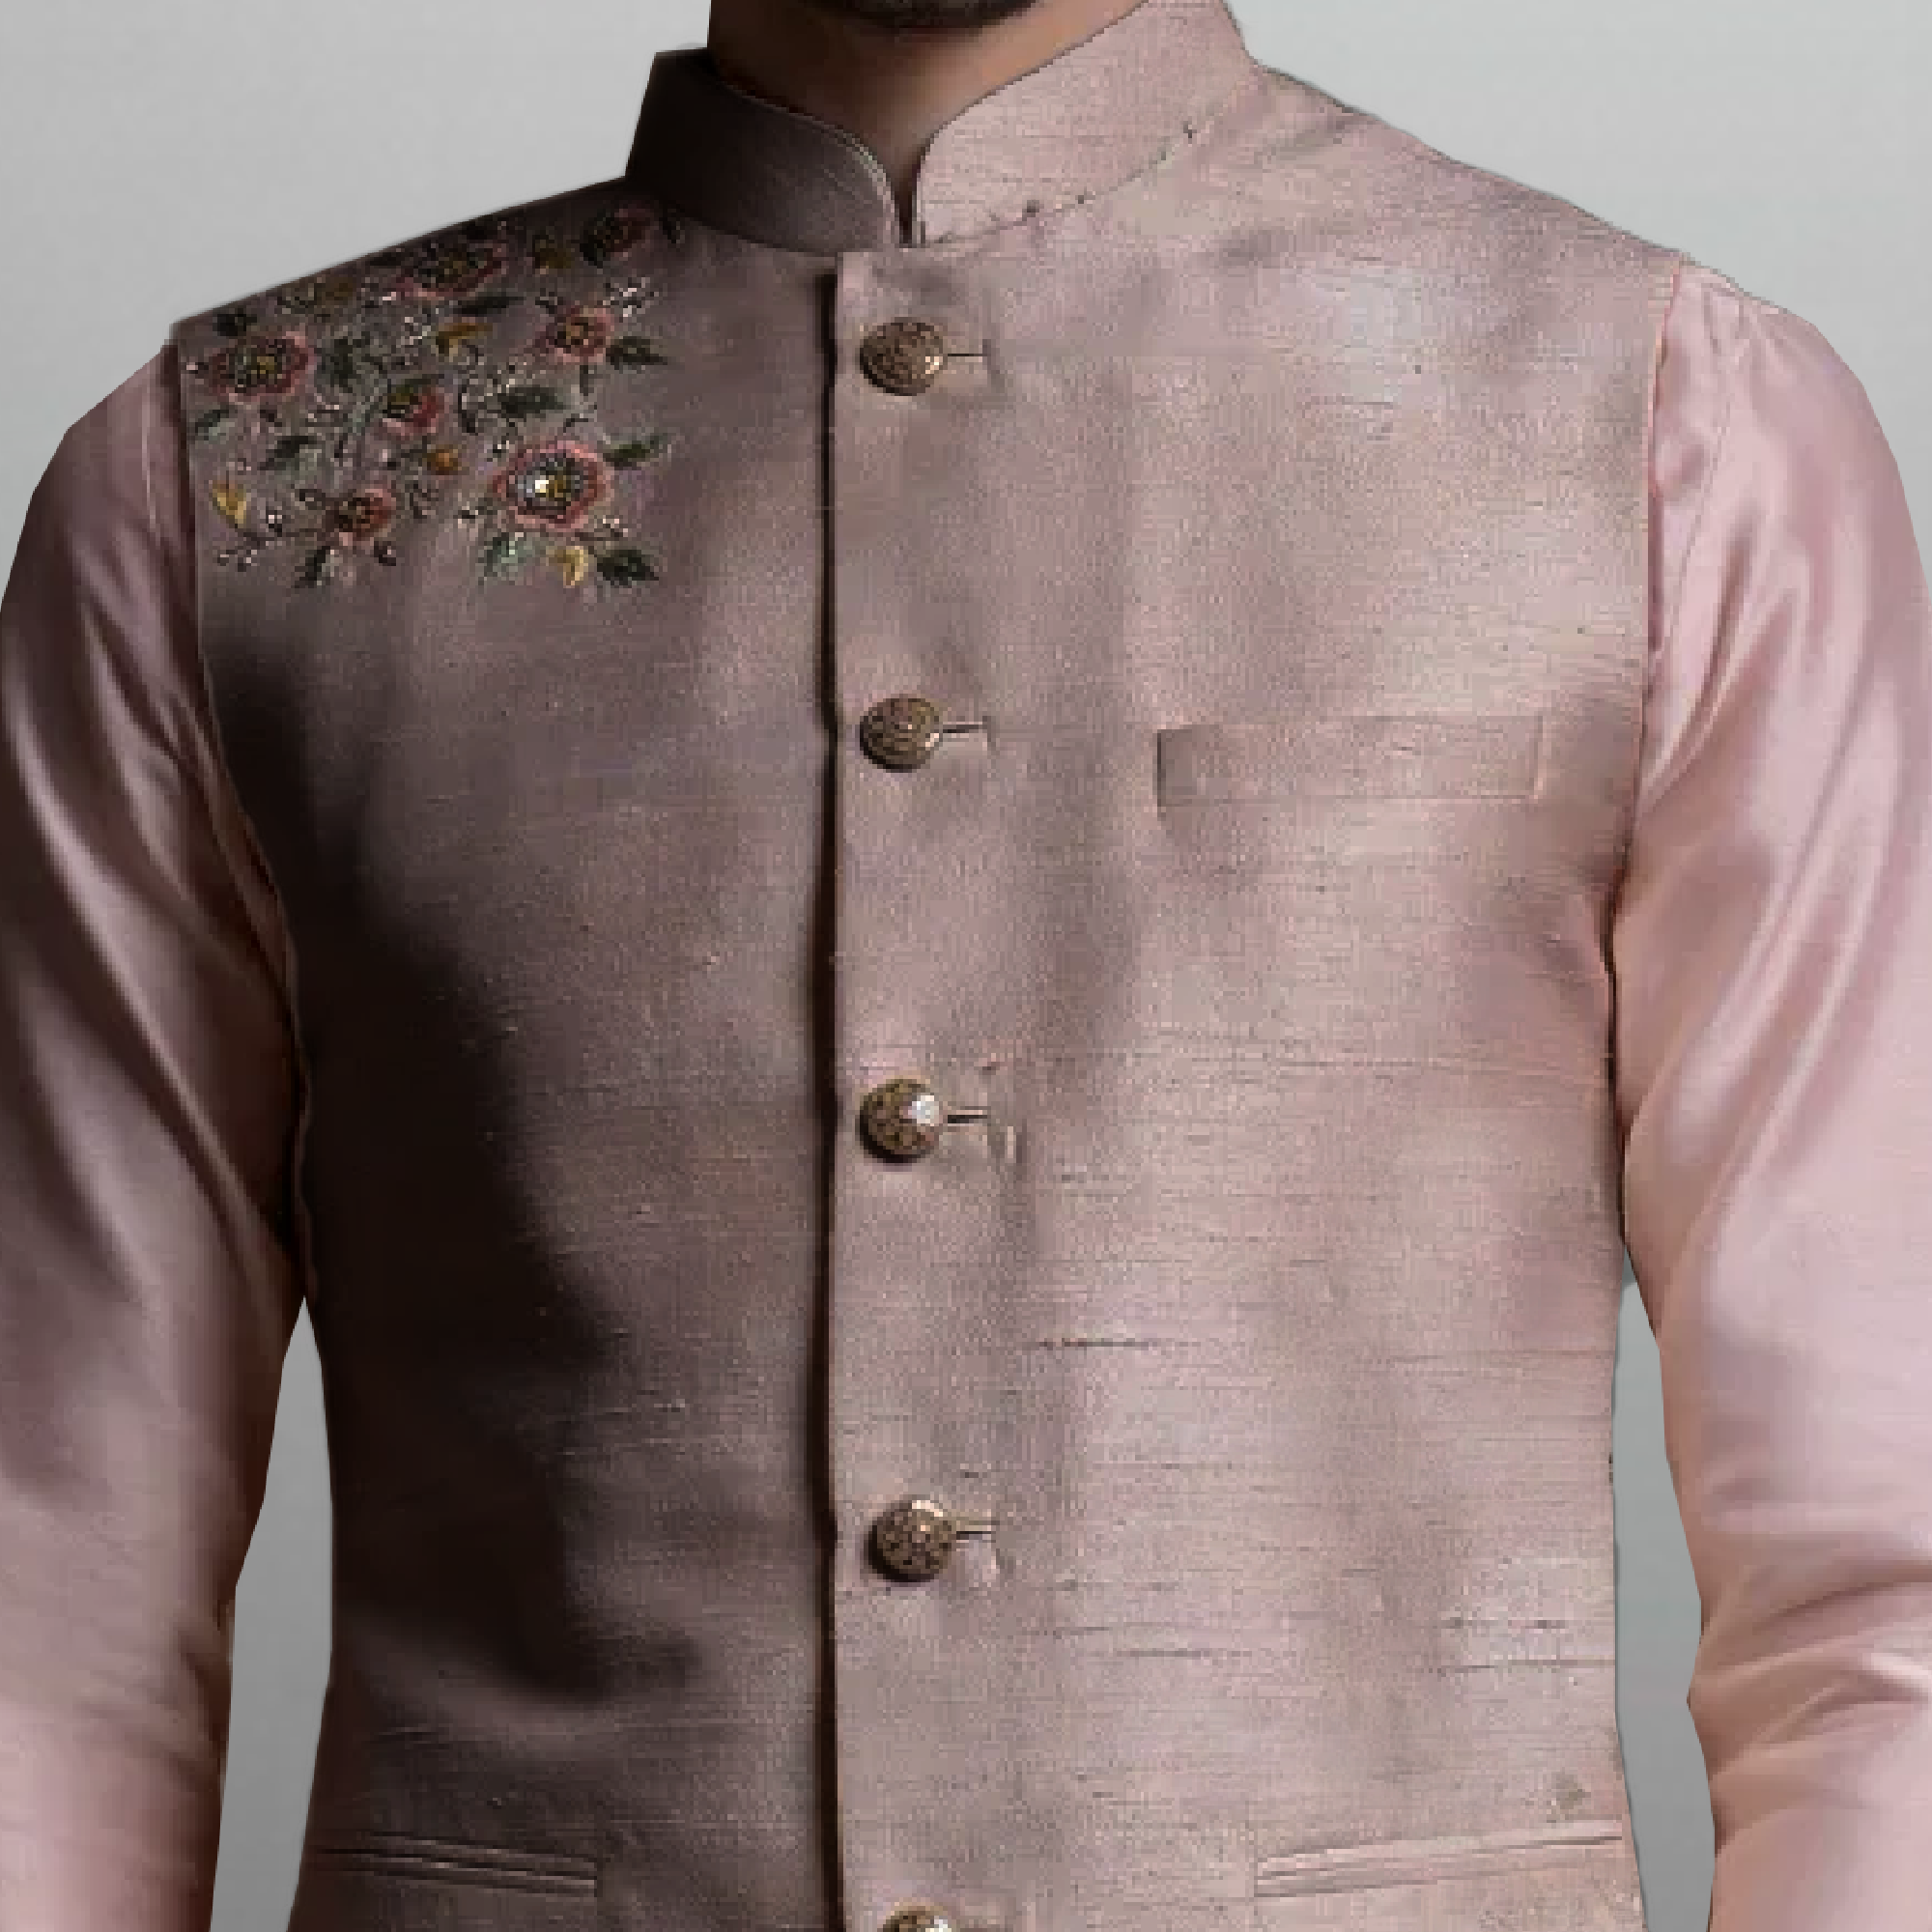 Men's Rose Gold Waistcoat with embroidery work-RMWC009